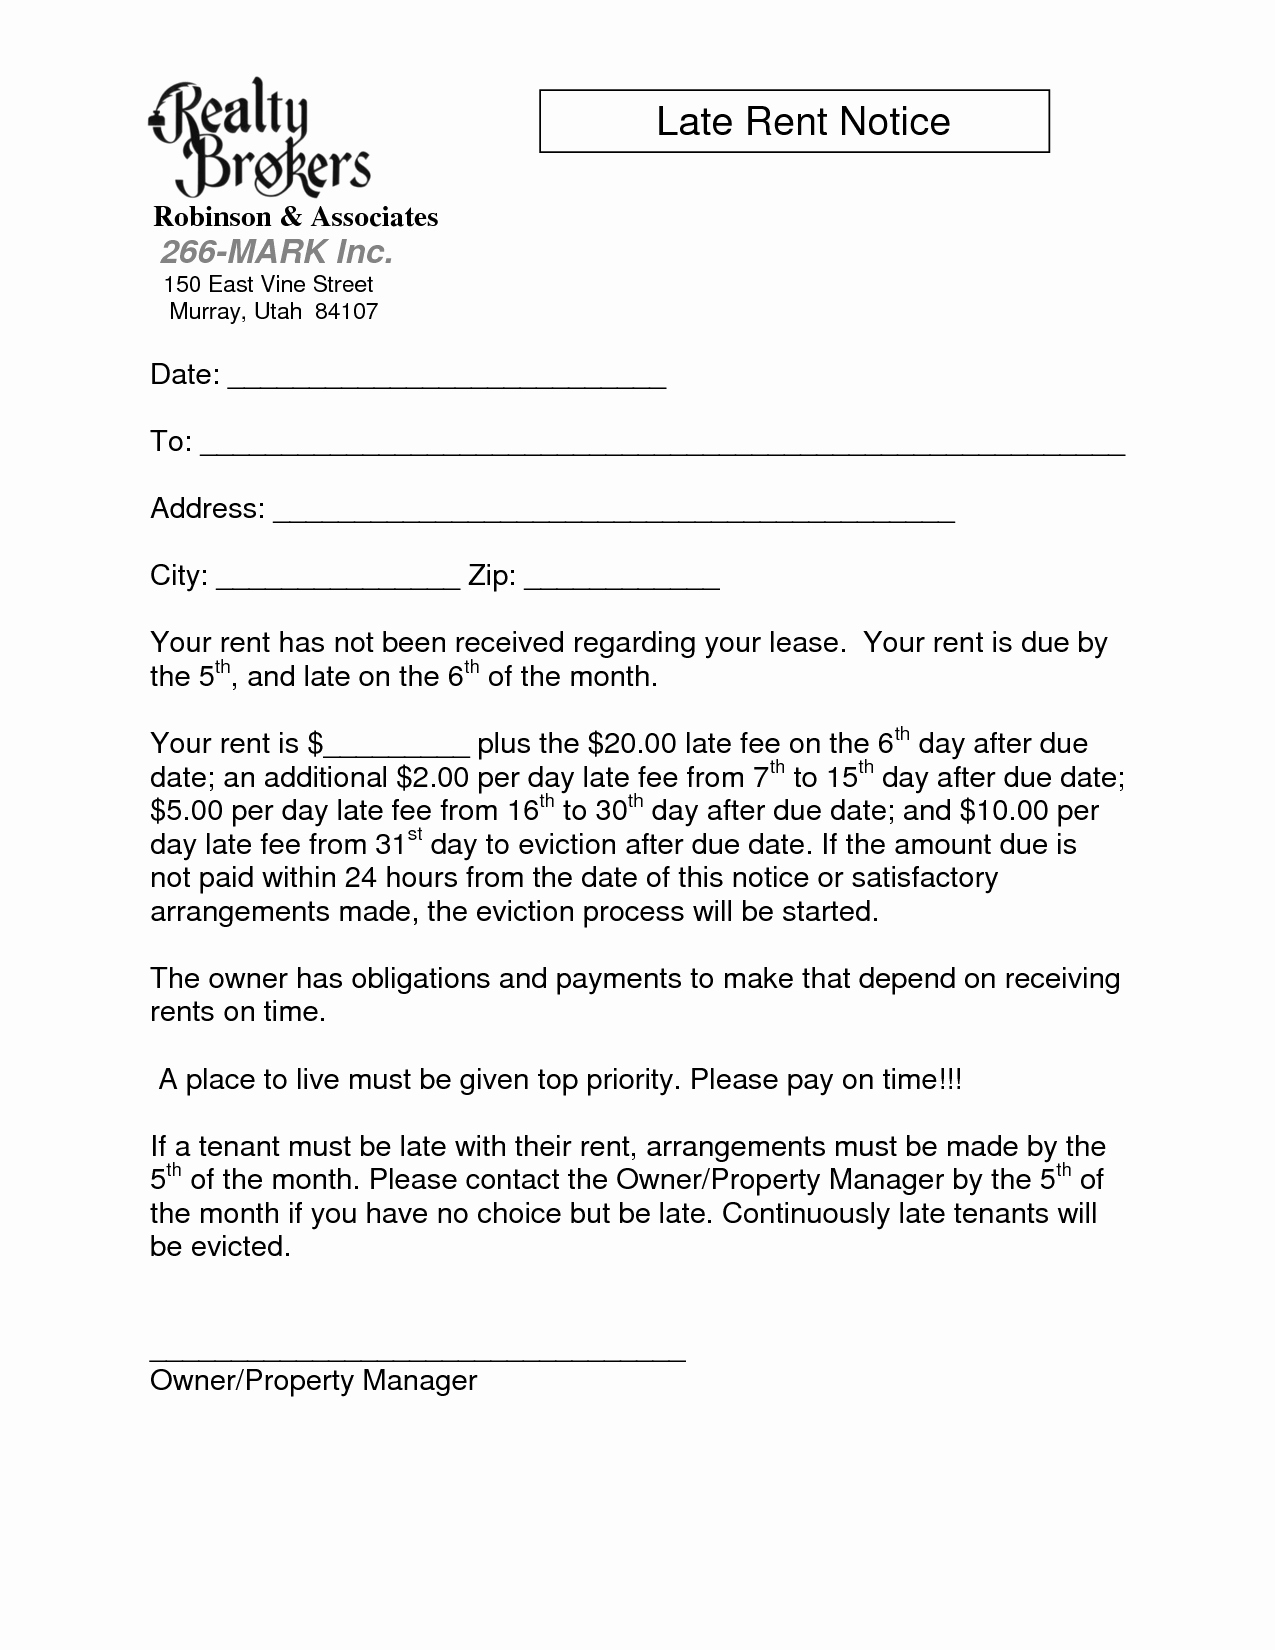 Late Rent Letter Template - Notice Letter to Landlord Template Awesome 19 New Late Rent Letter